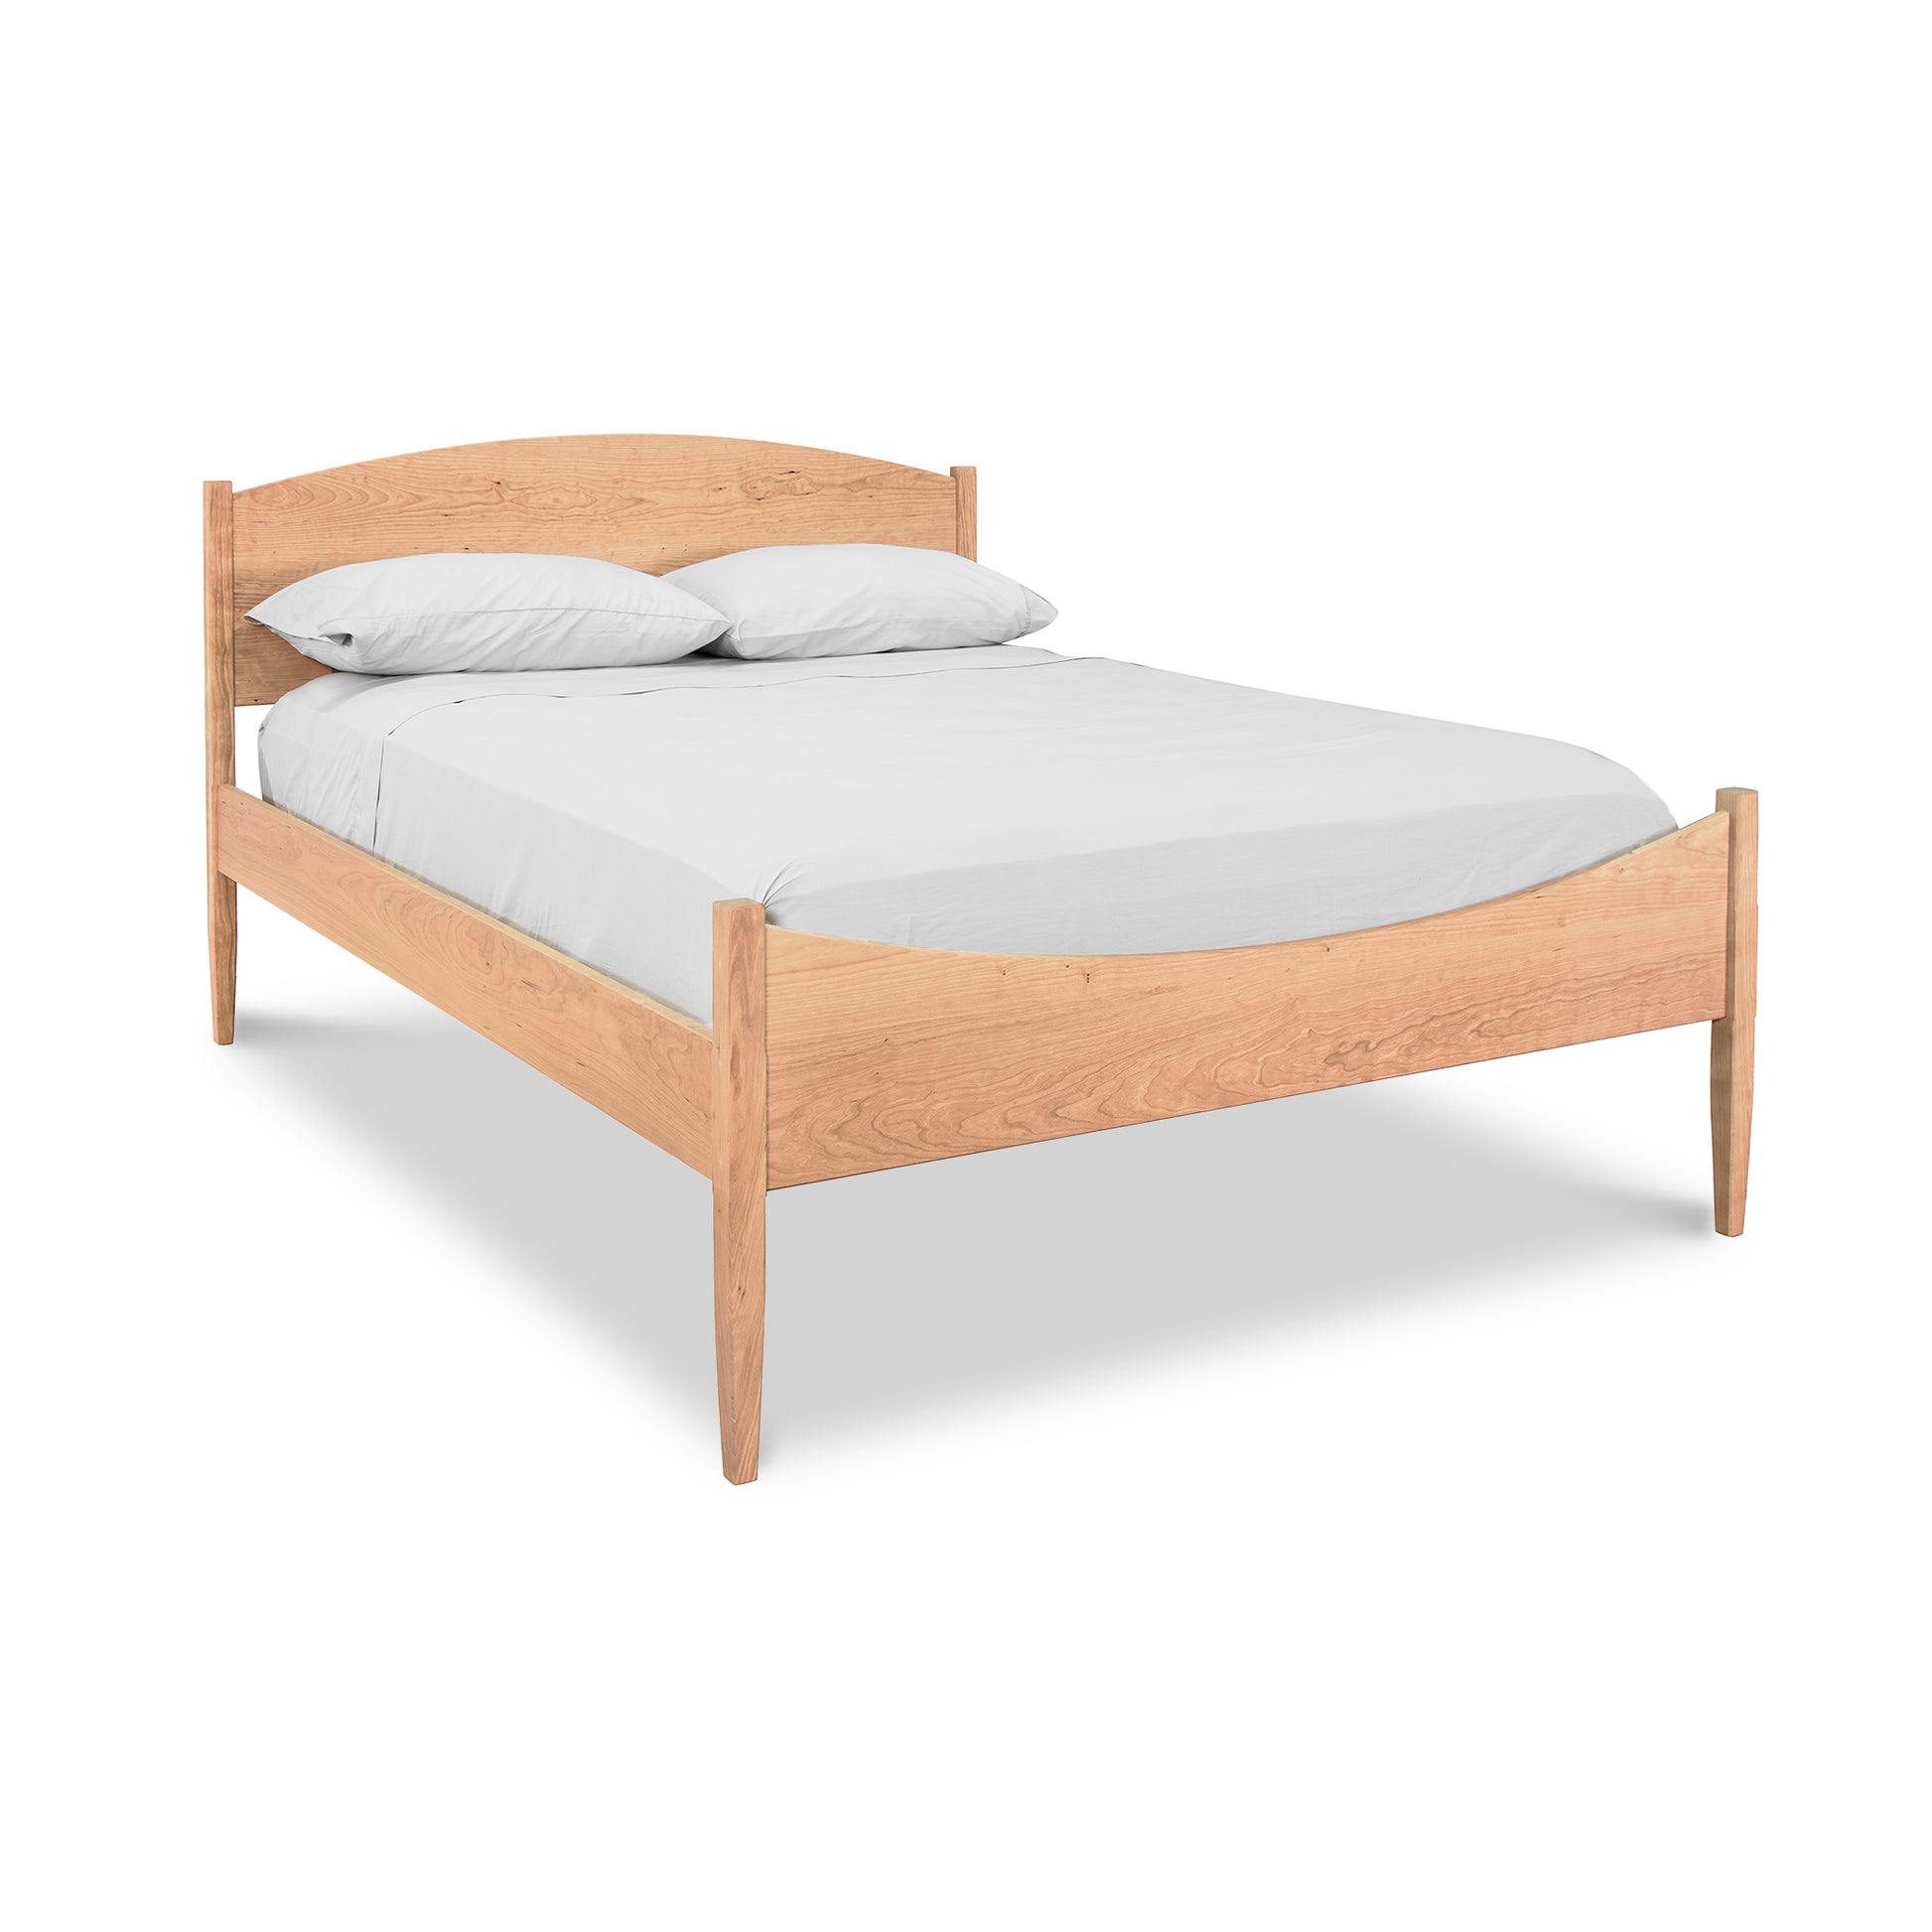 A Vermont Shaker Moon Bed frame with a mattress, two pillows, and white bedding from the Maple Corner Woodworks Collection, isolated on a white background.